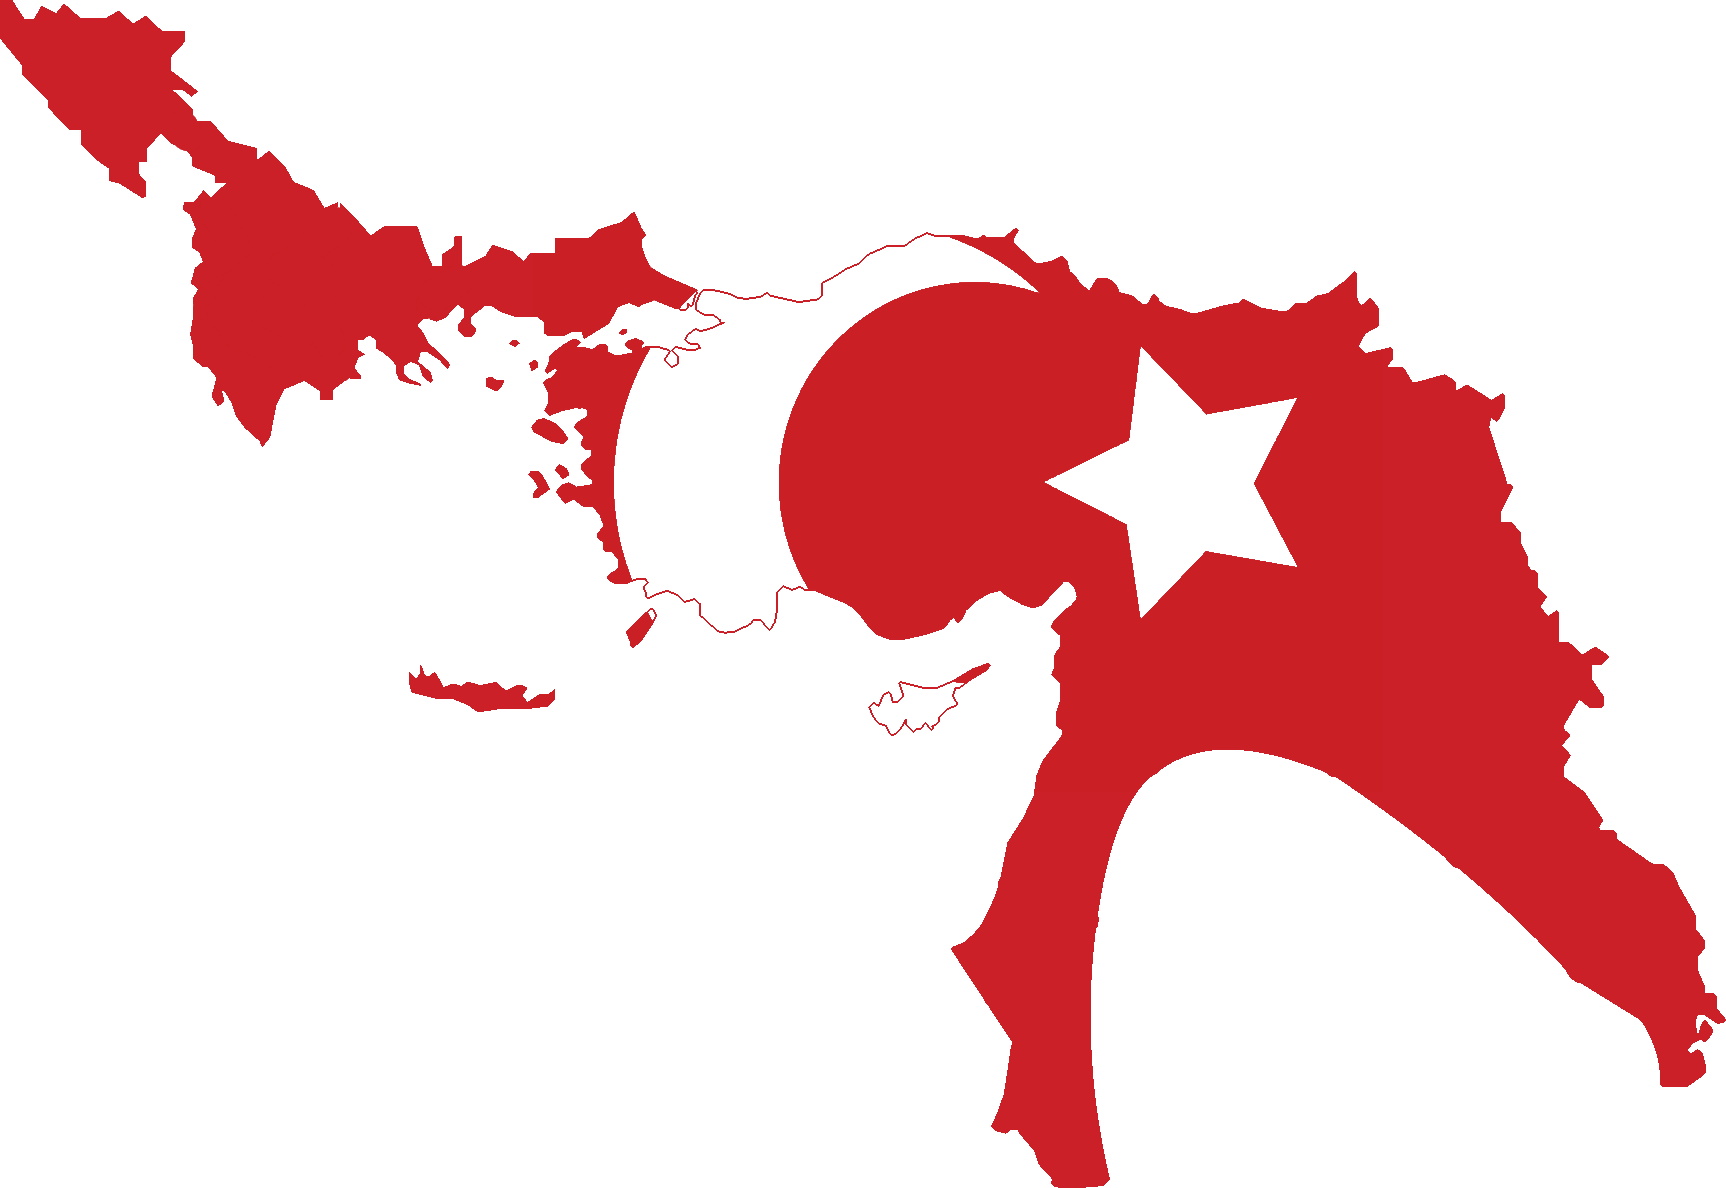 File:Flag-map of Ottoman Empire Greatest Extent.png - Wikimedia